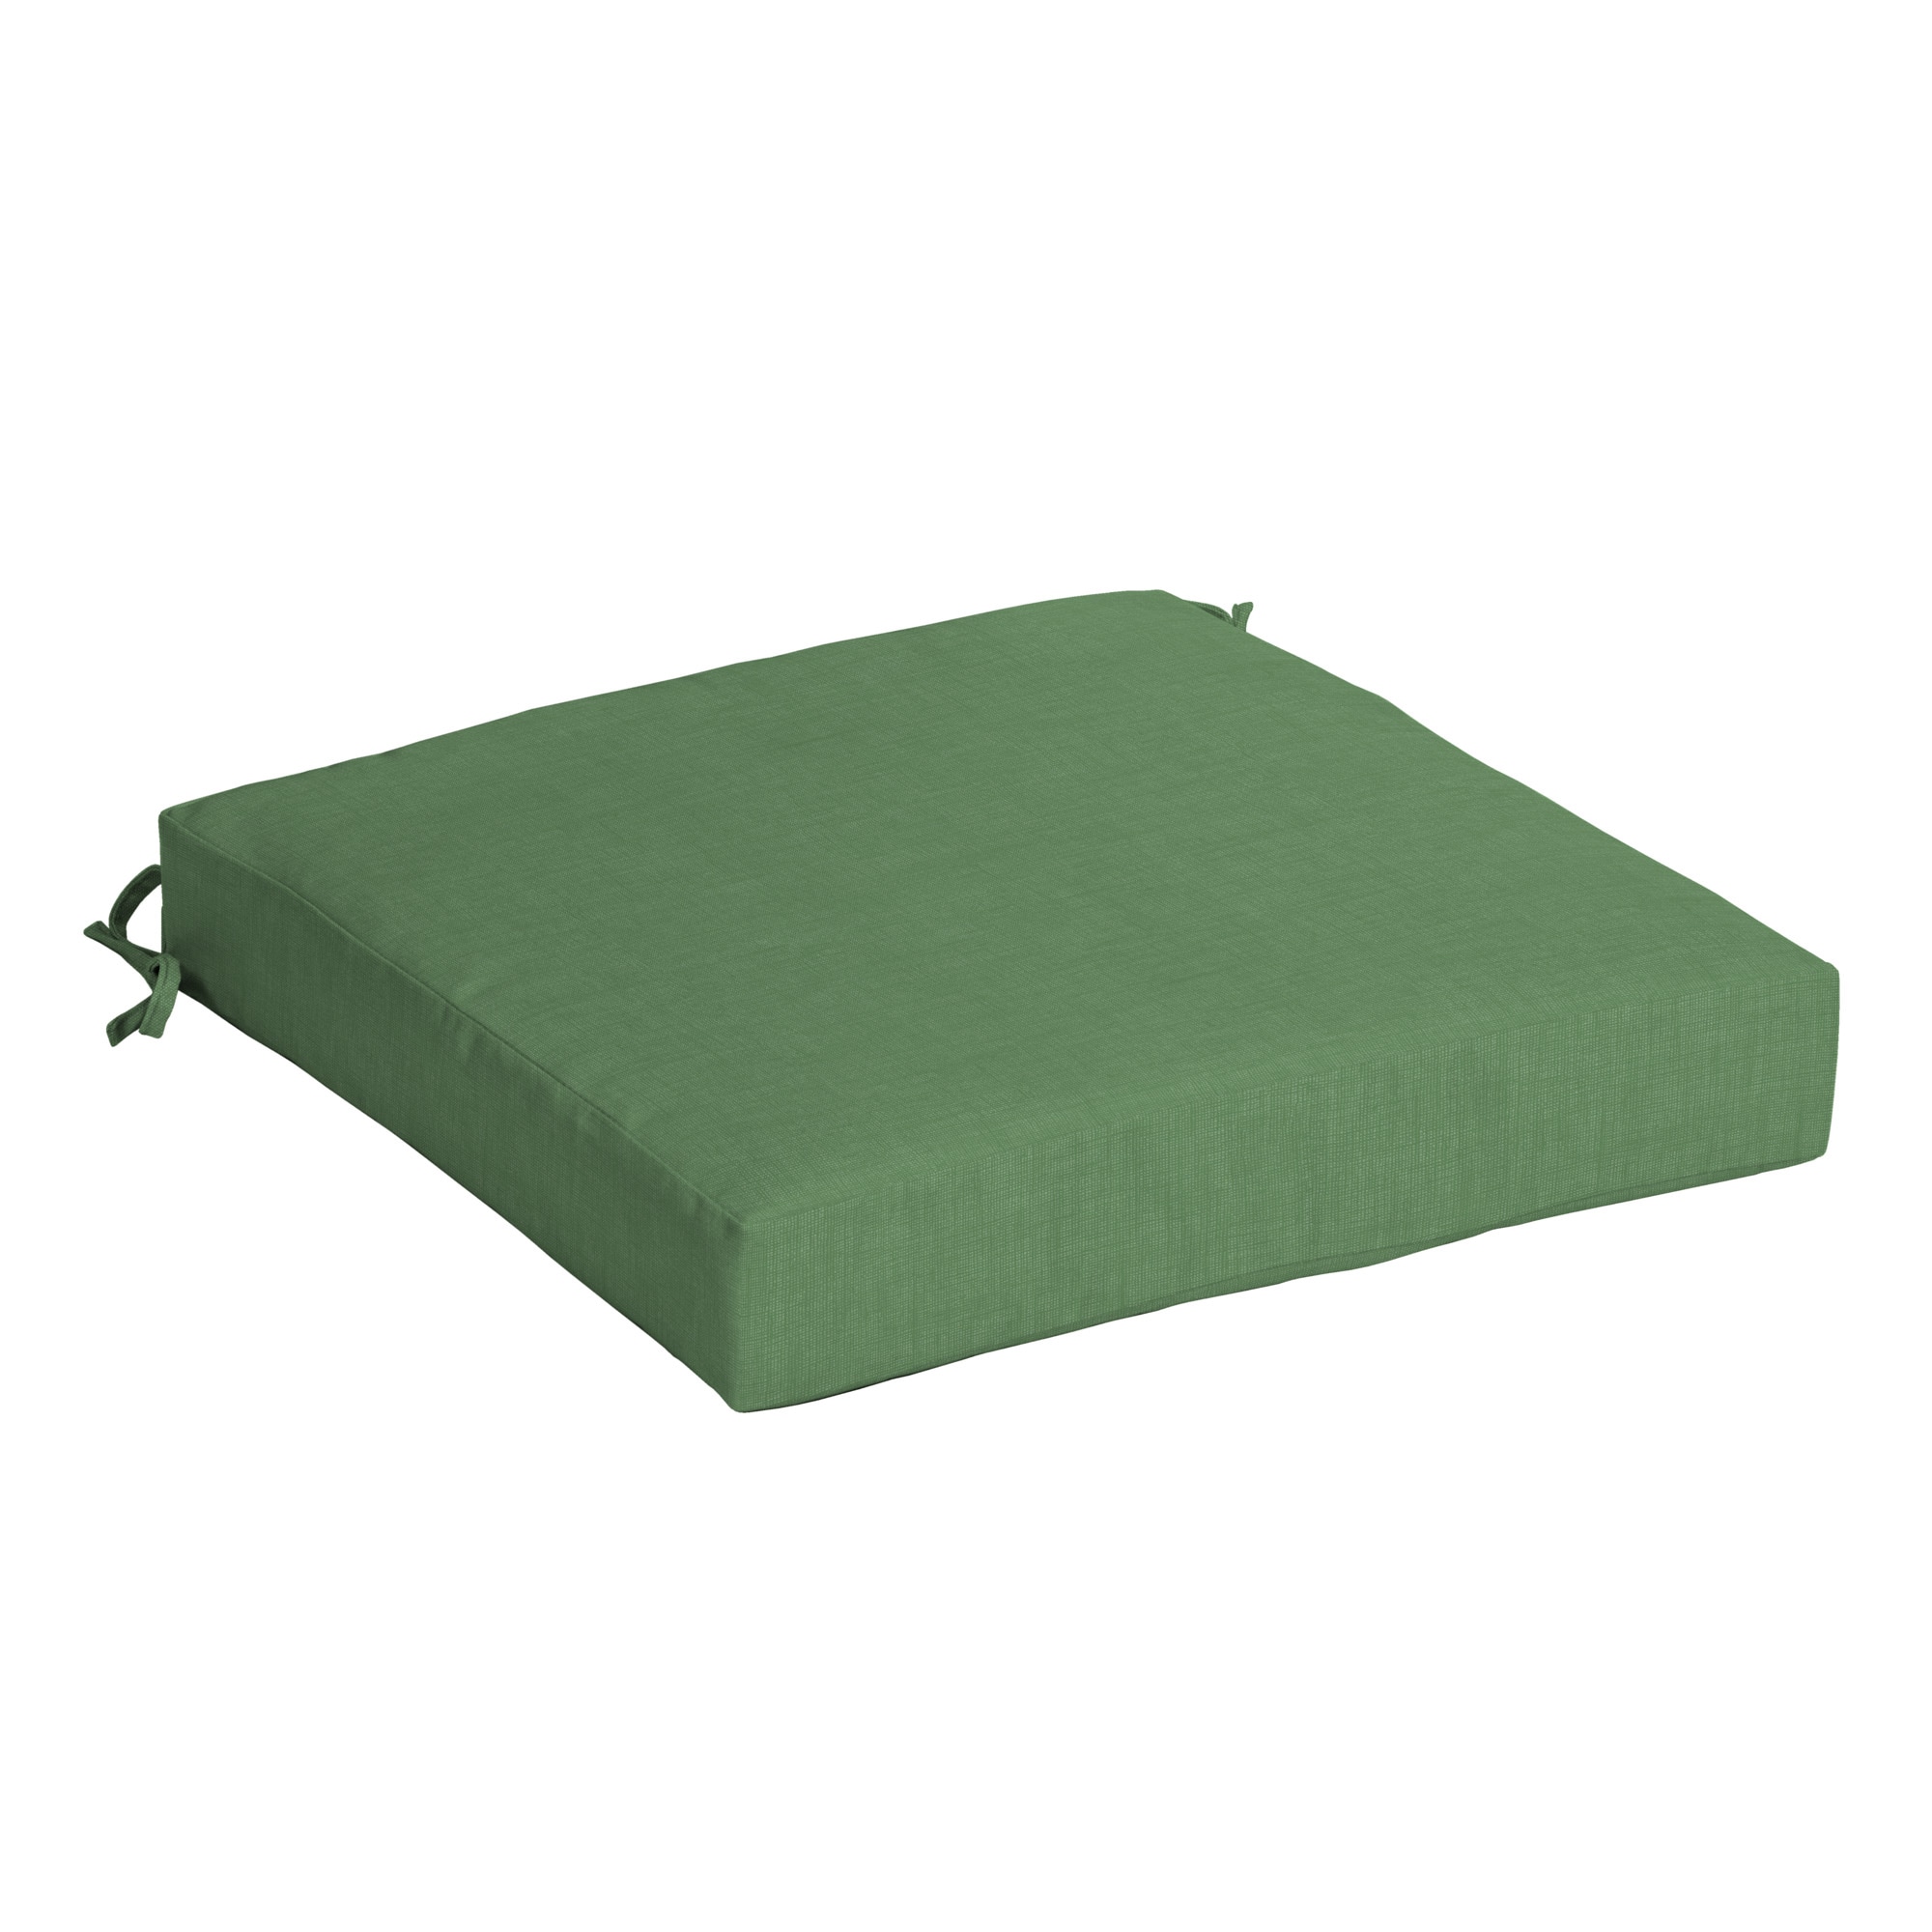 Arden Selections 21-in x 21-in Moss Green Leala Patio Chair Cushion in ...